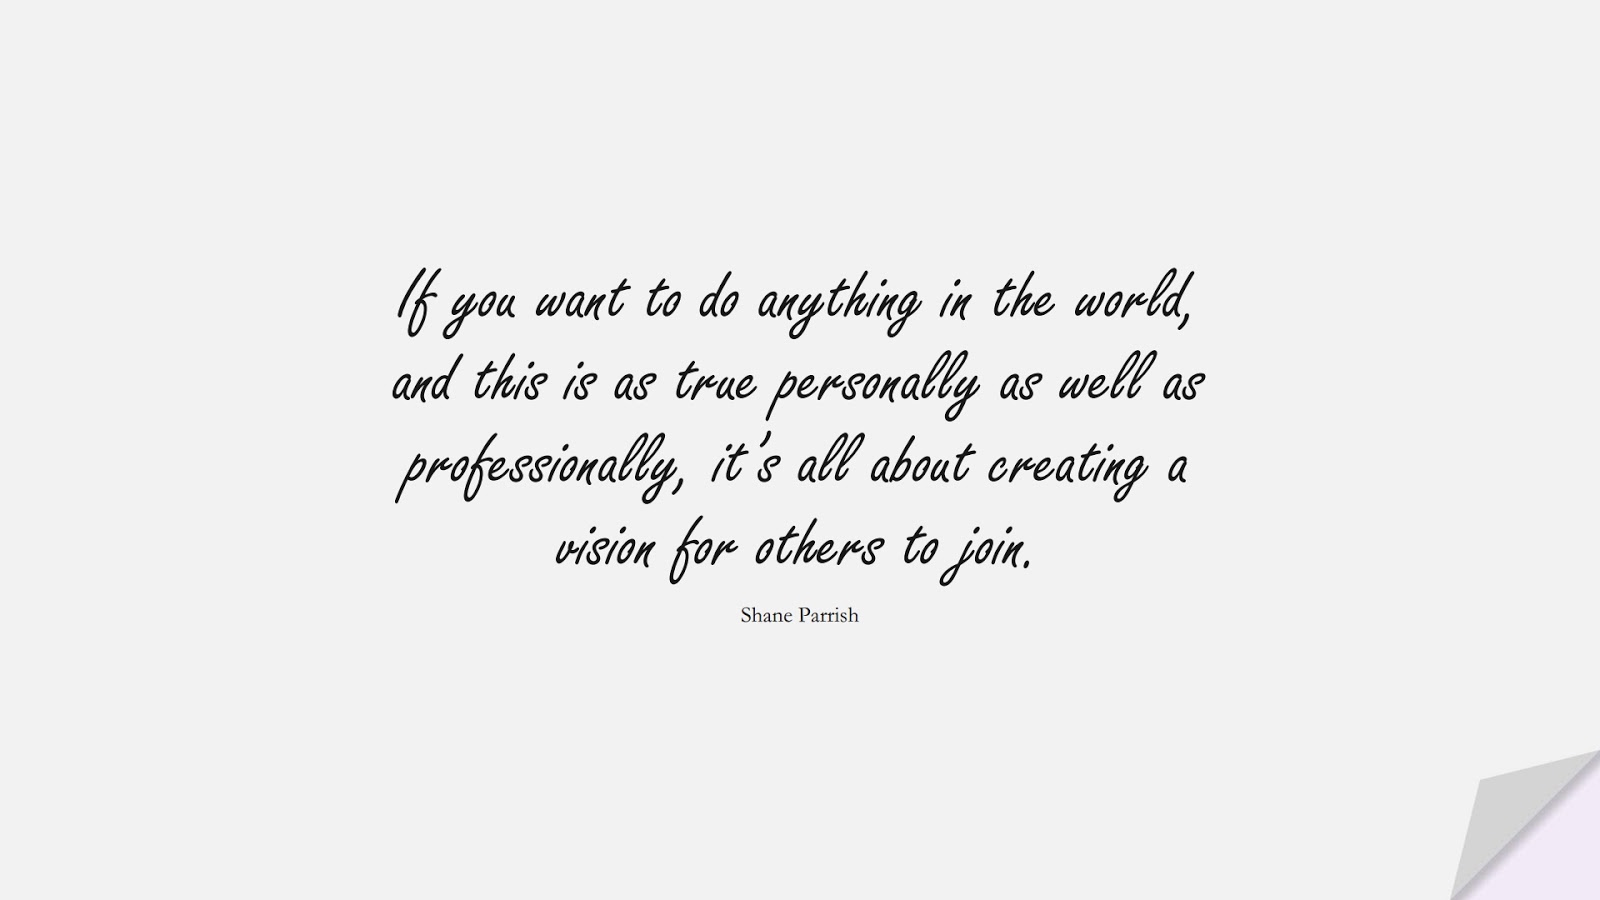 If you want to do anything in the world, and this is as true personally as well as professionally, it’s all about creating a vision for others to join. (Shane Parrish);  #RelationshipQuotes